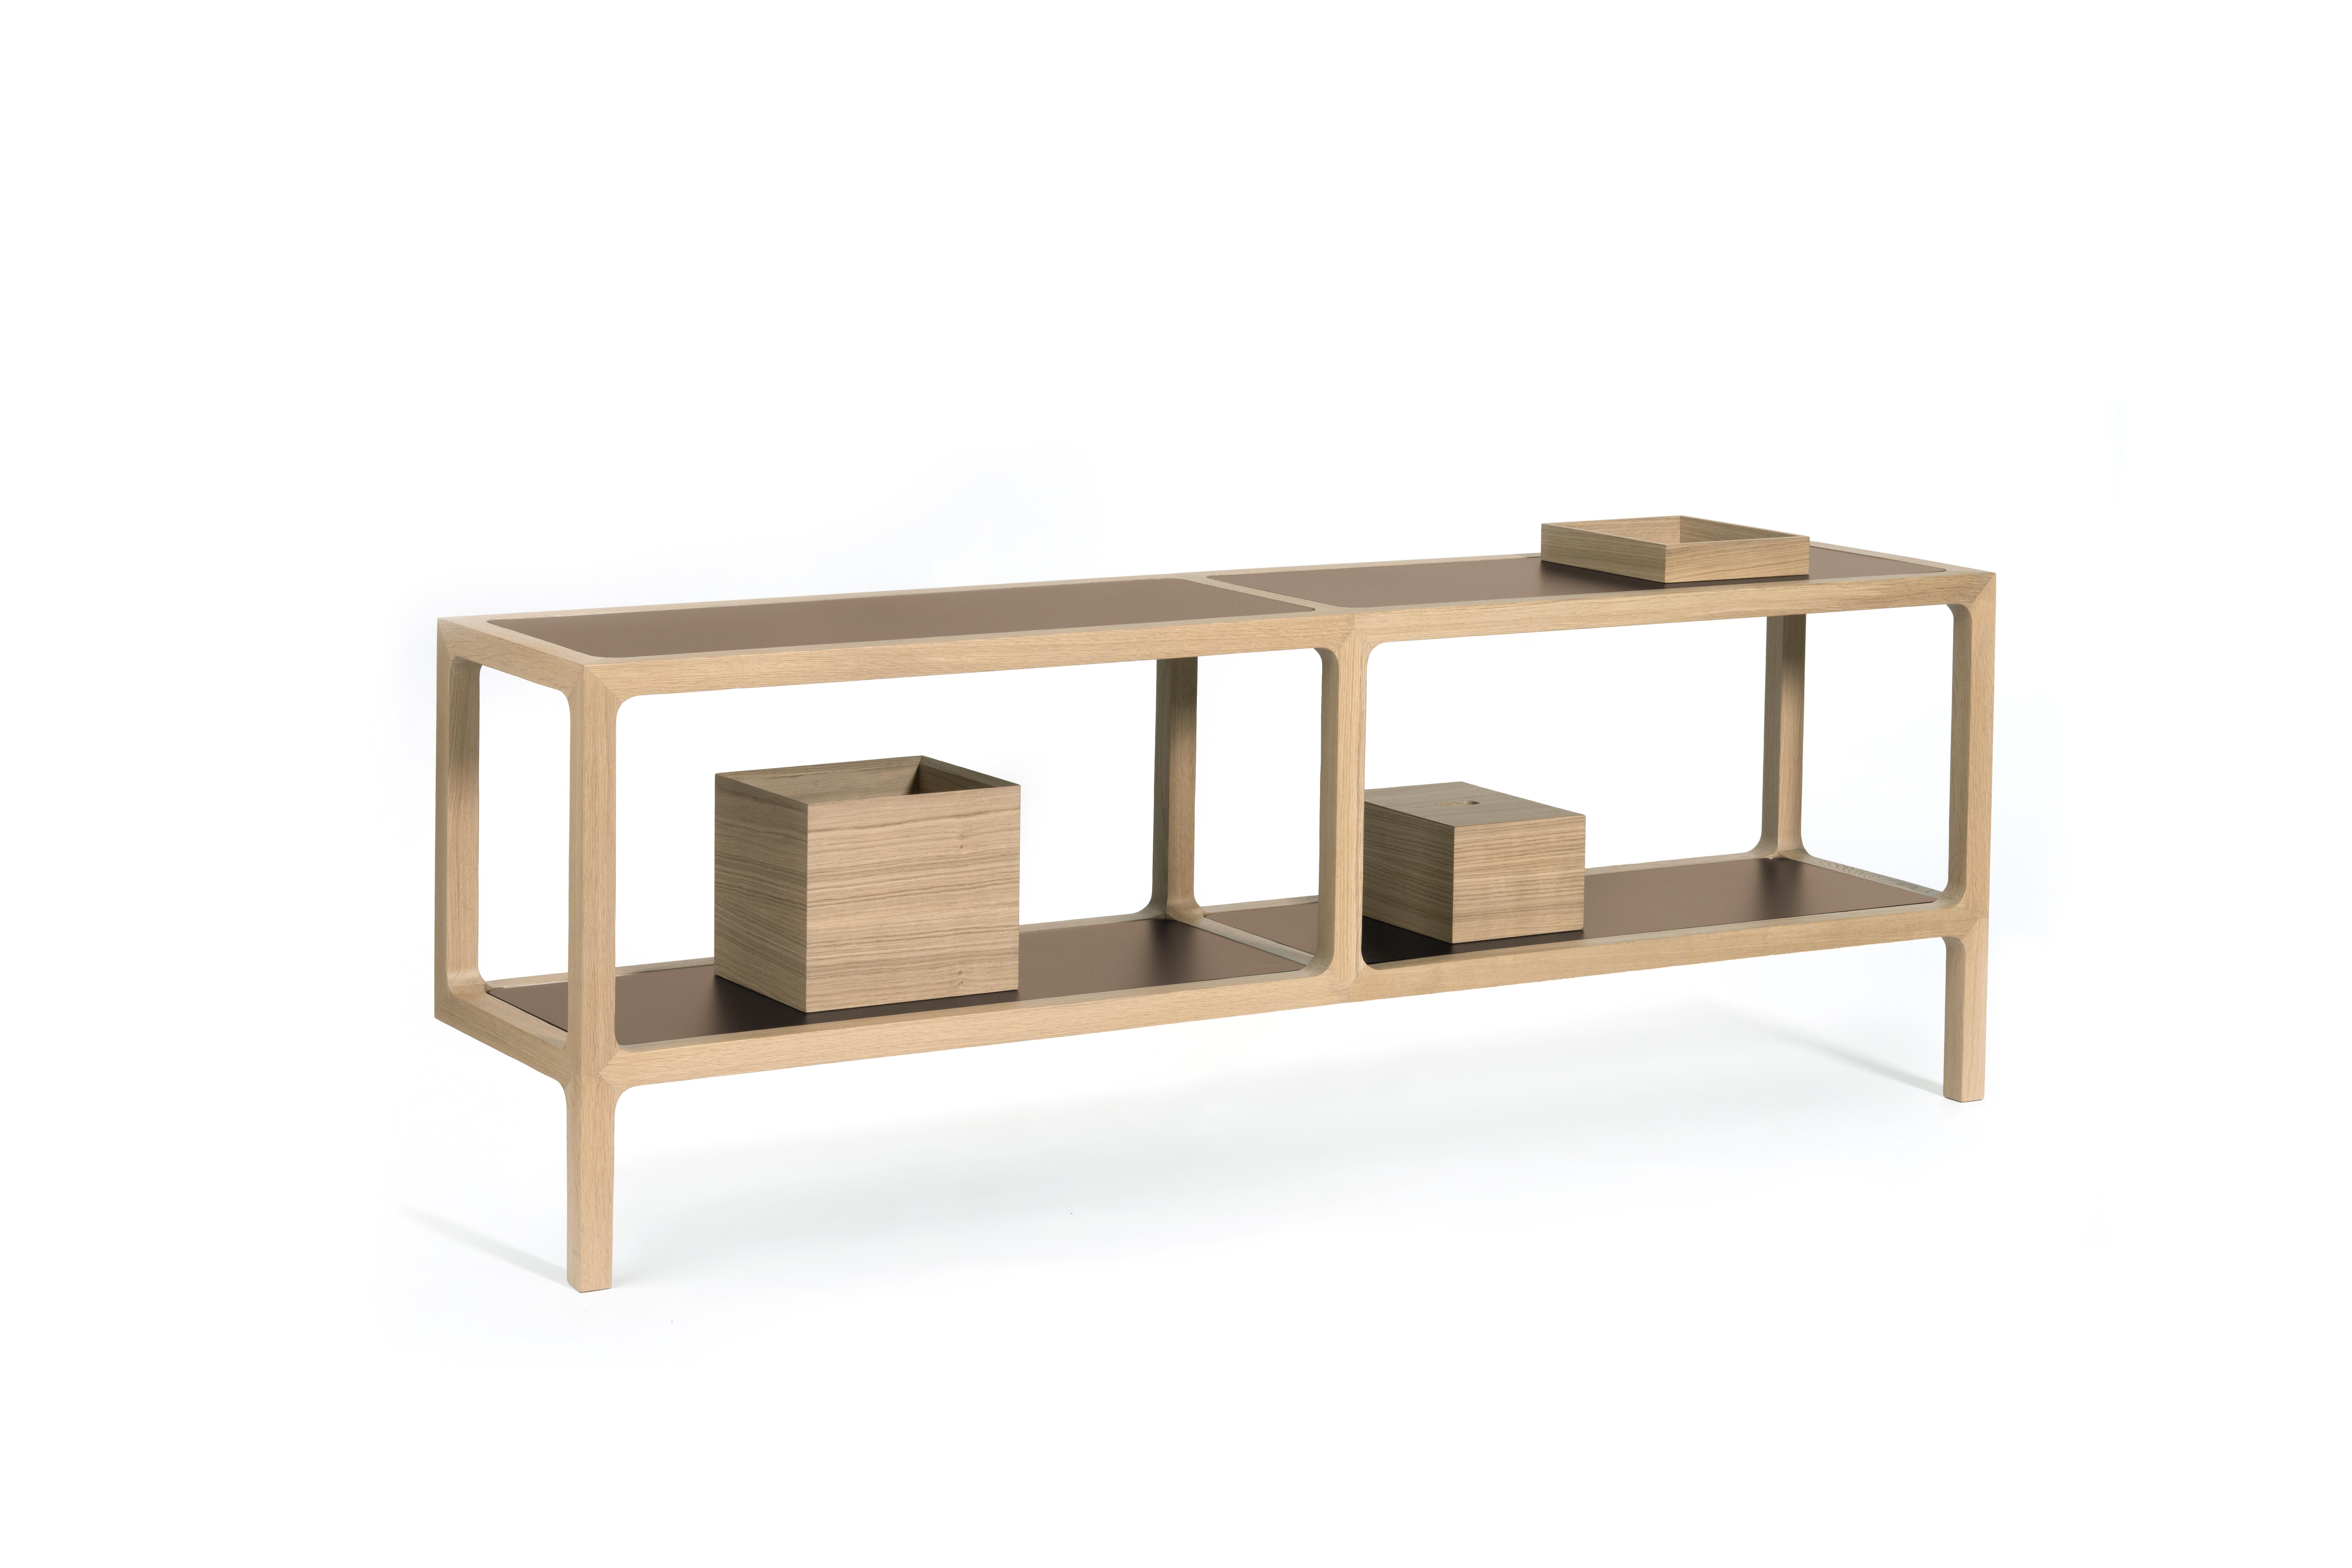 Pair of 2 more box 25 by Mentemano
Dimensions: W20 x D 28 x H 25 cm
Materials: Oak


A tray and two boxes available in two dimensions with cover, made of wood with bronze mirror inserts as possible option.


Mentemano is a design concept